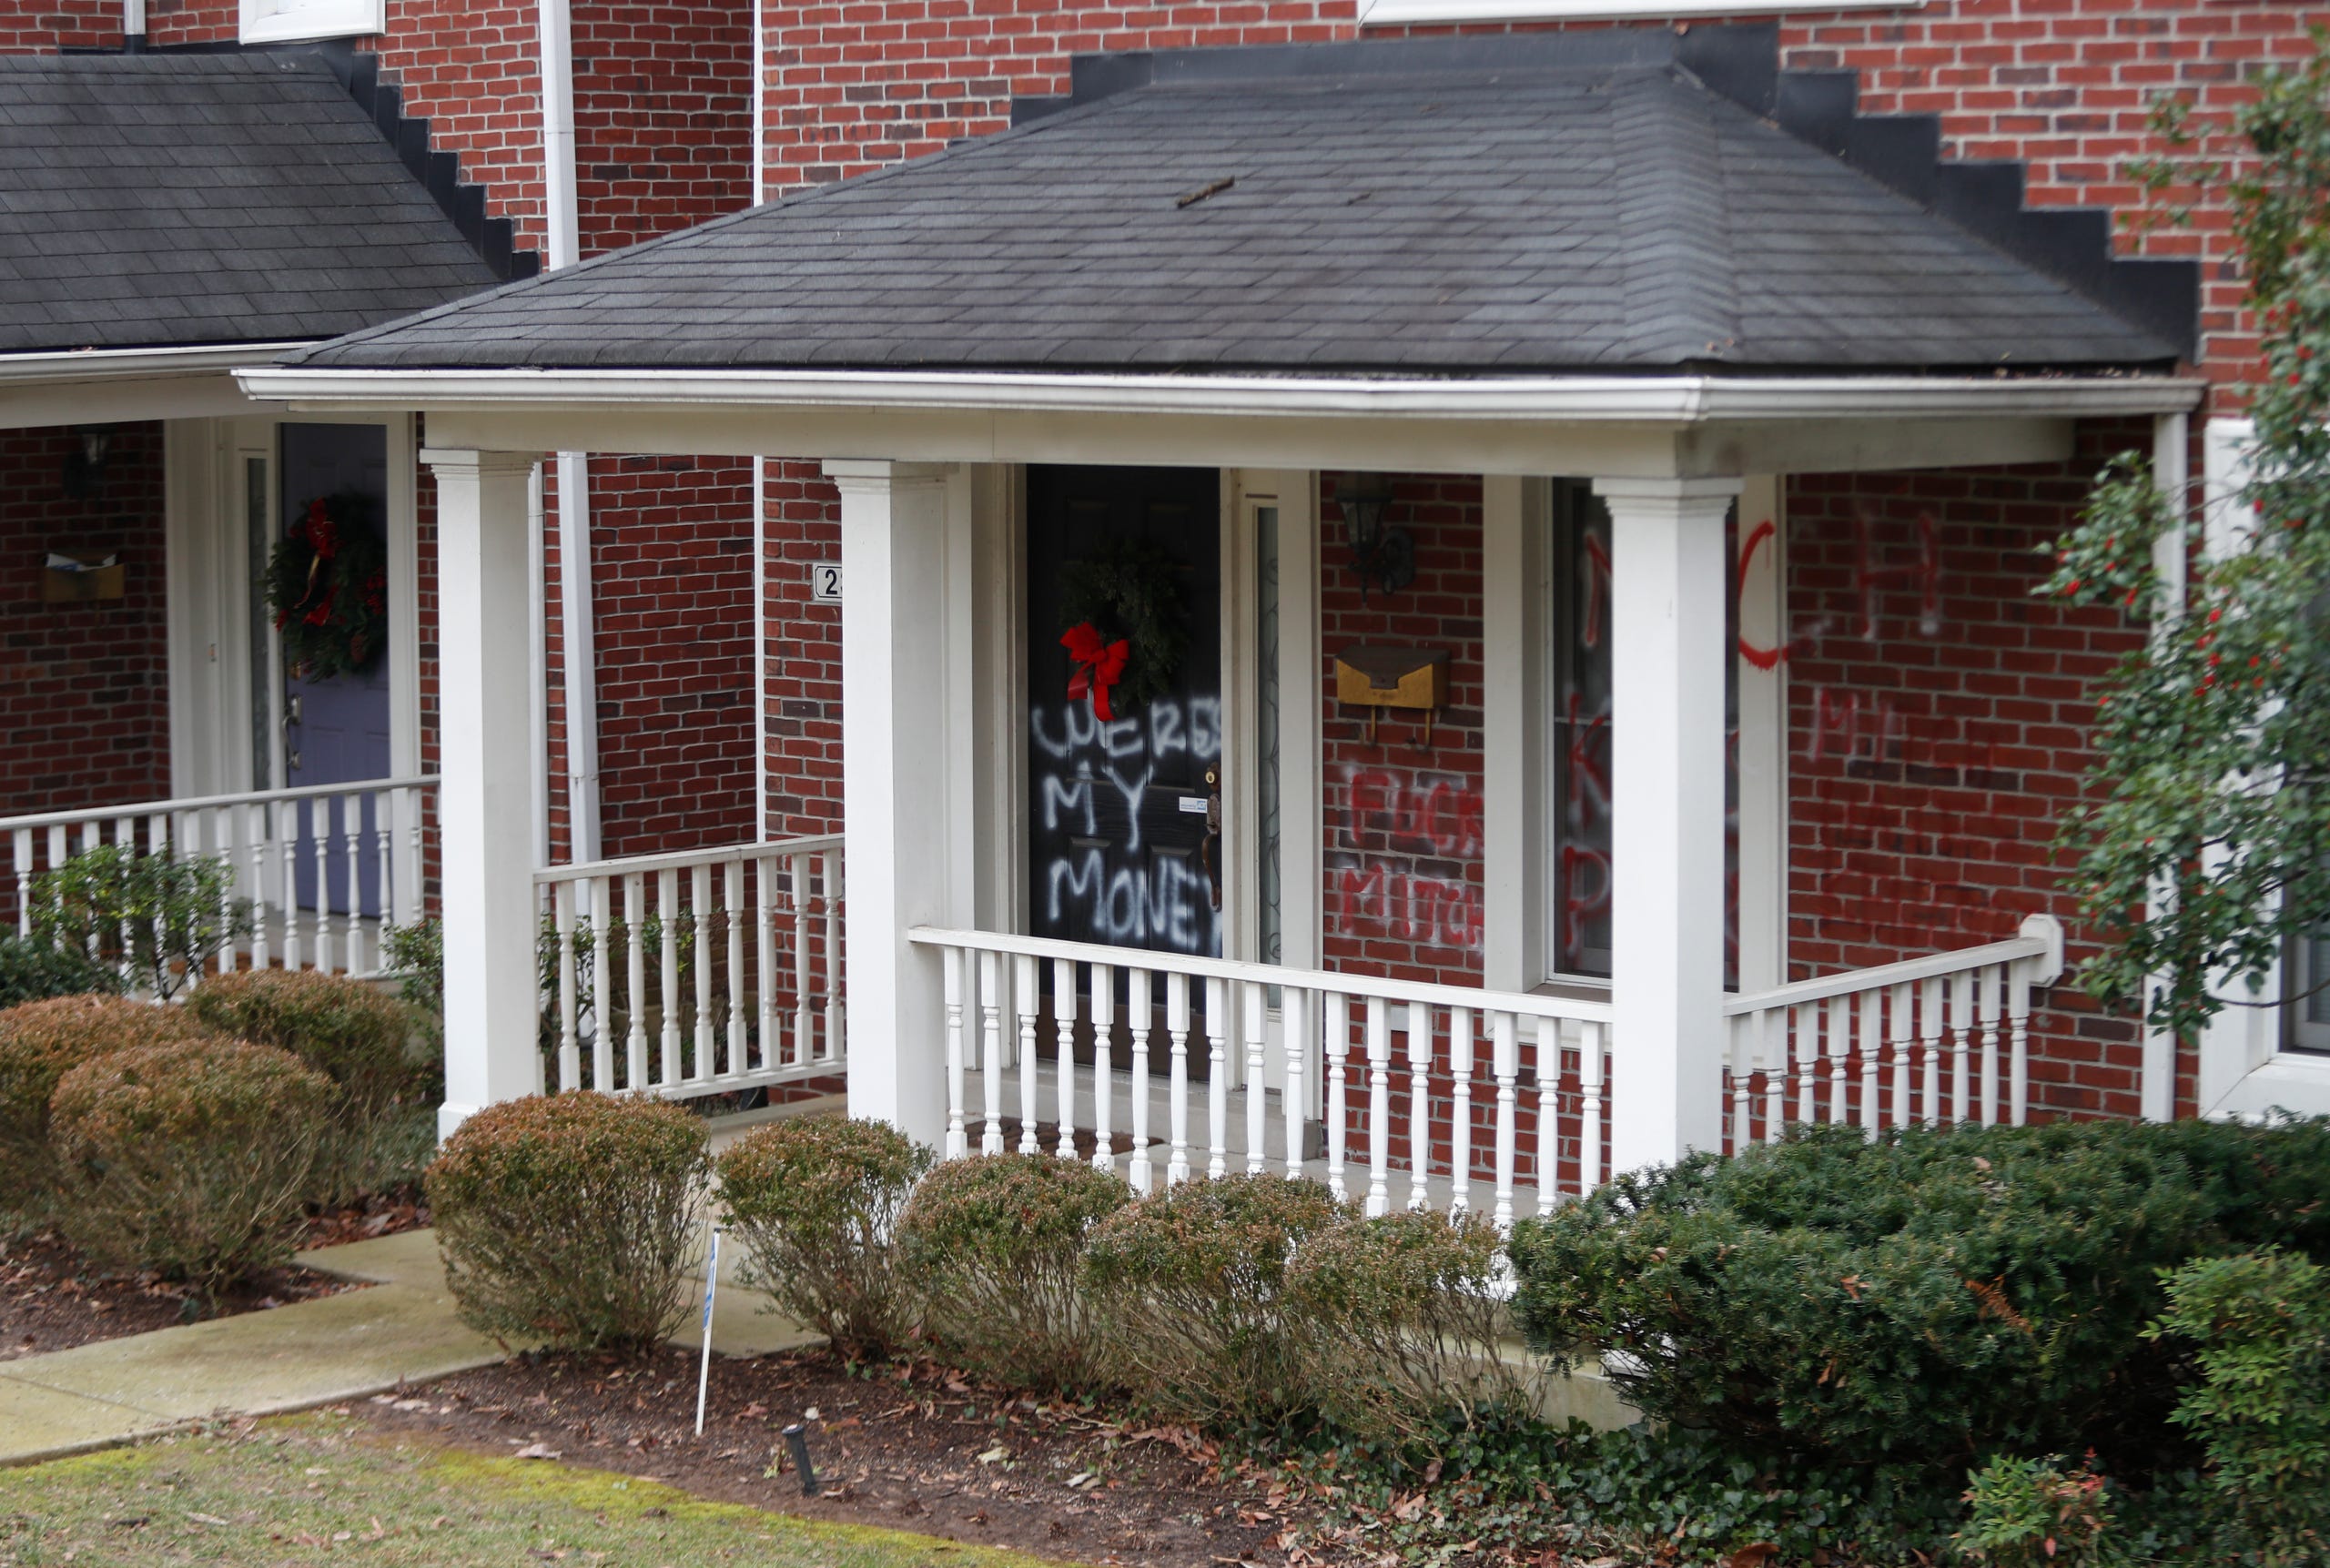 Senator Mcconnell S House Is Vandalized